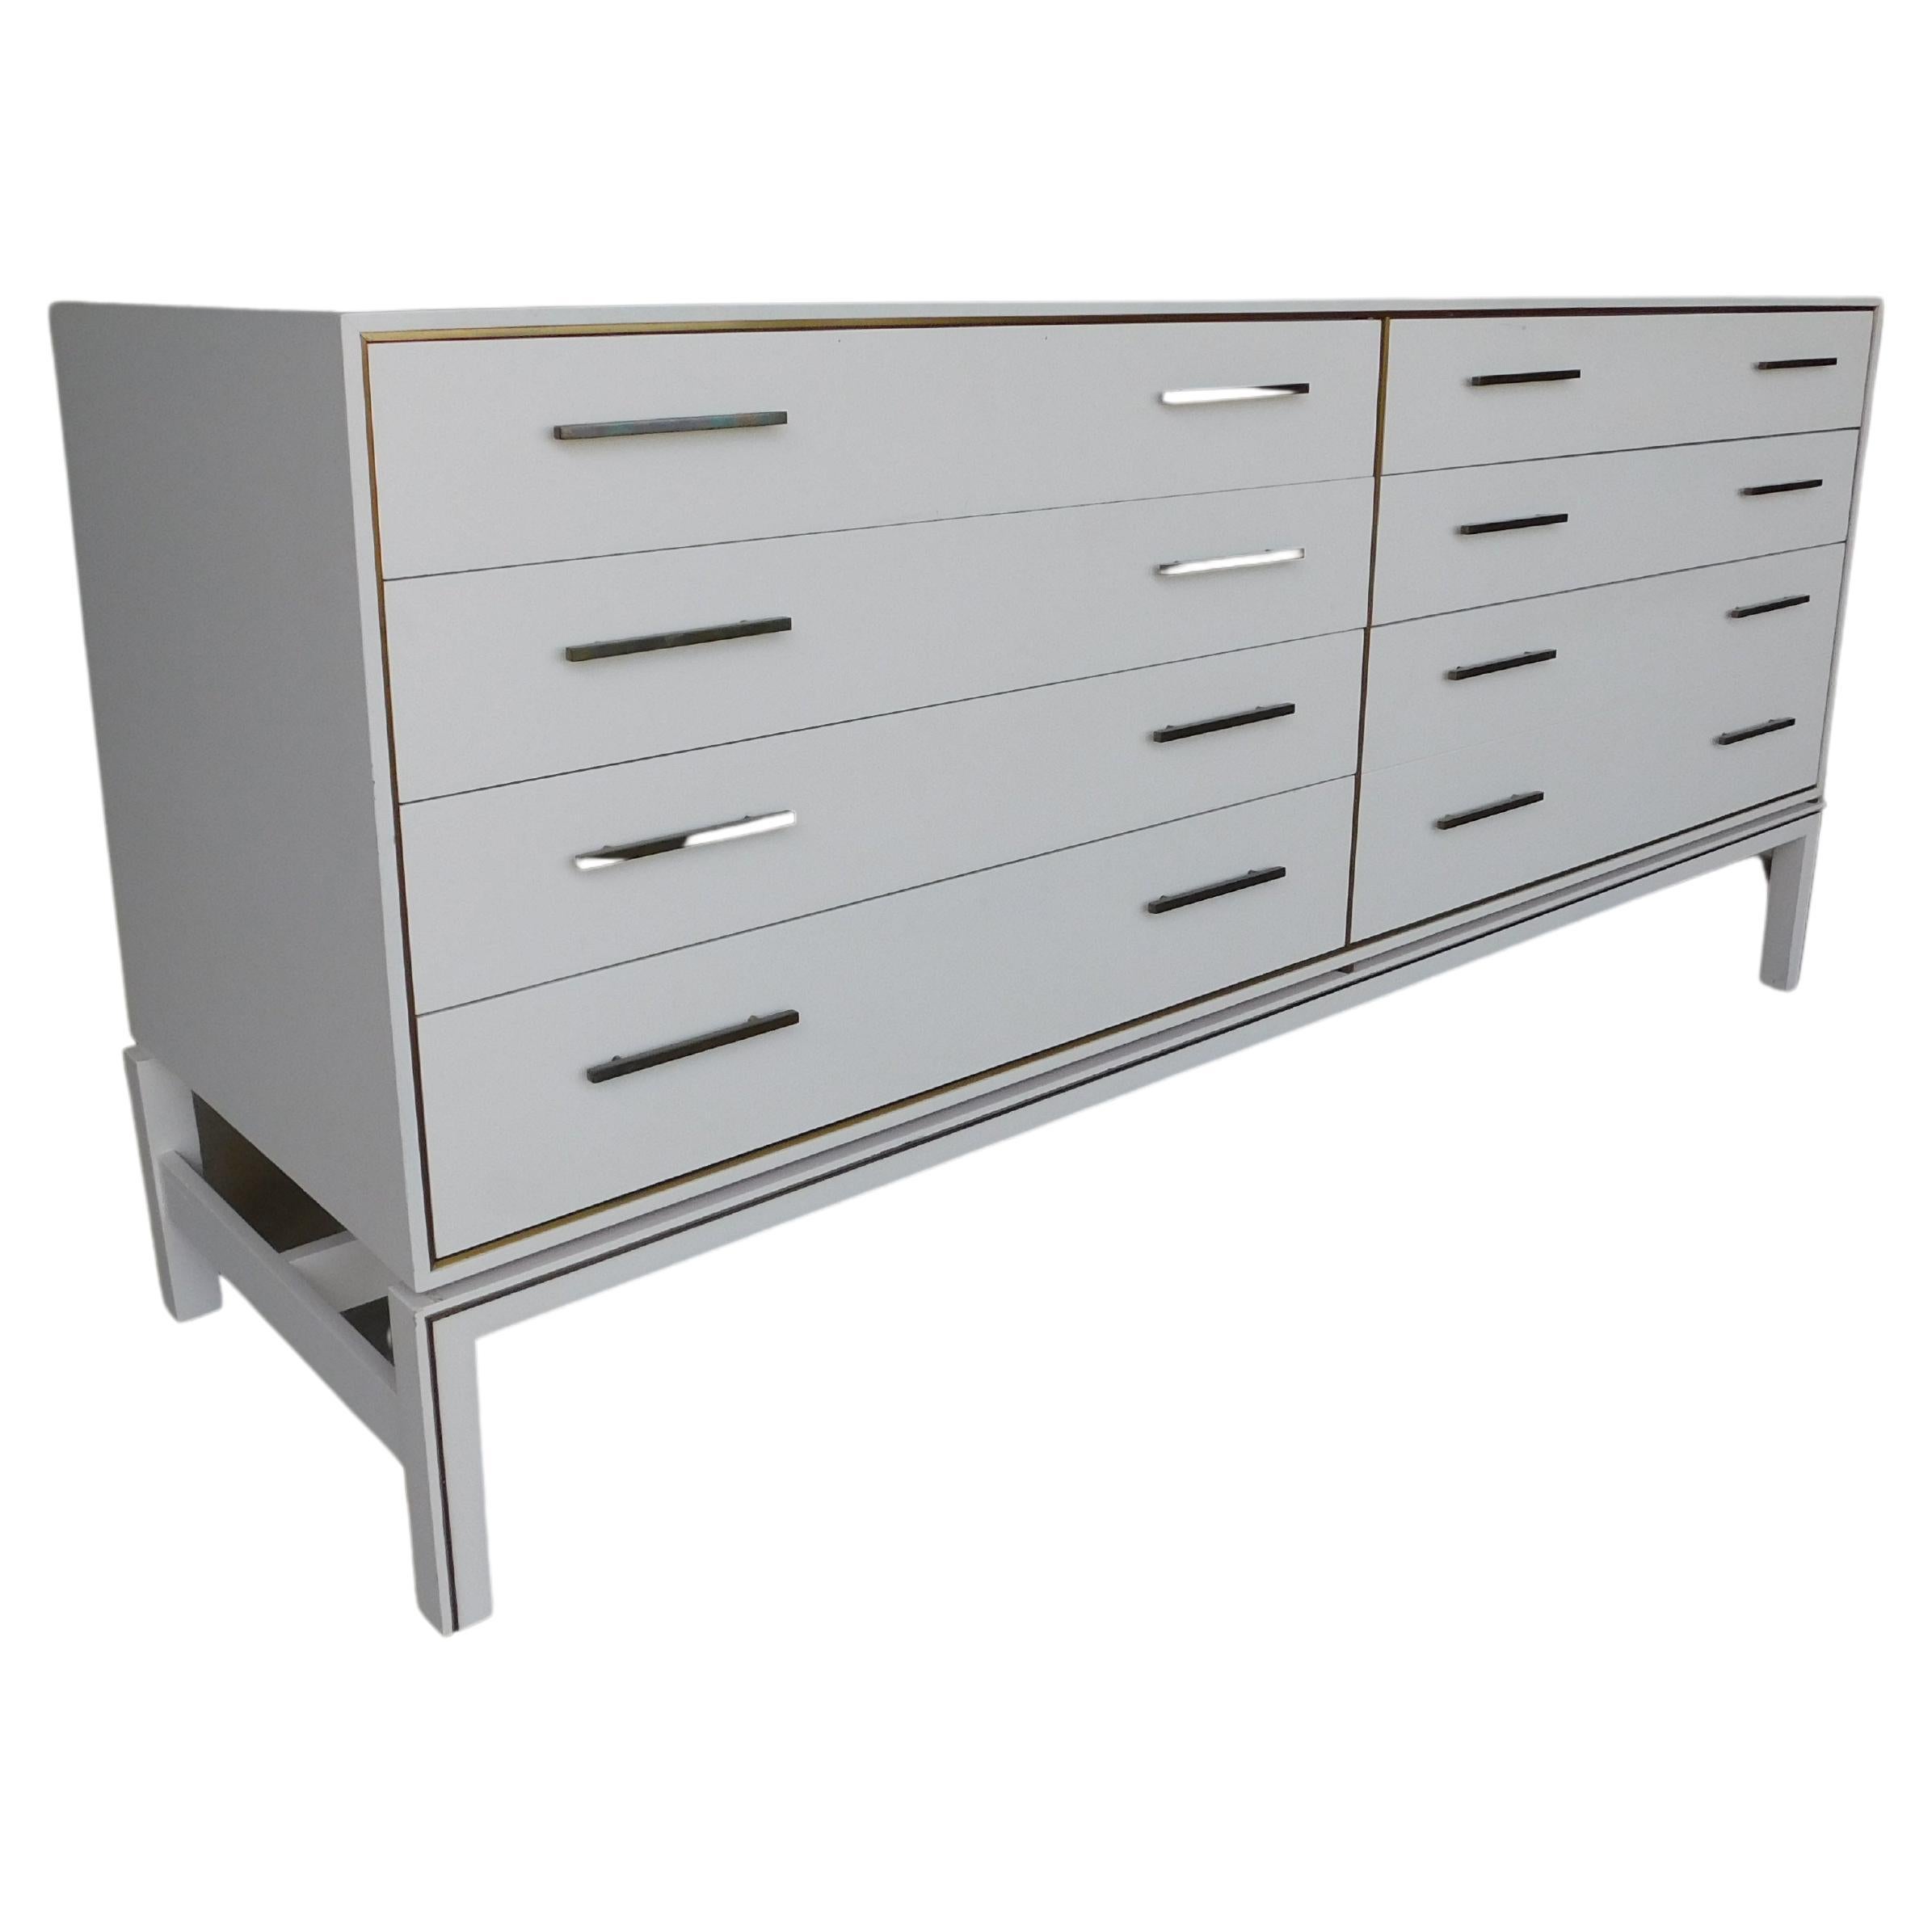 Features - 7 dovetailed drawers, mounted with brass pulls, and framed border in brass surrounding, Resting up on stretcher style base trimmed in brass accent. Factory original powder white paint finish adding to the clean straight decorative lines.